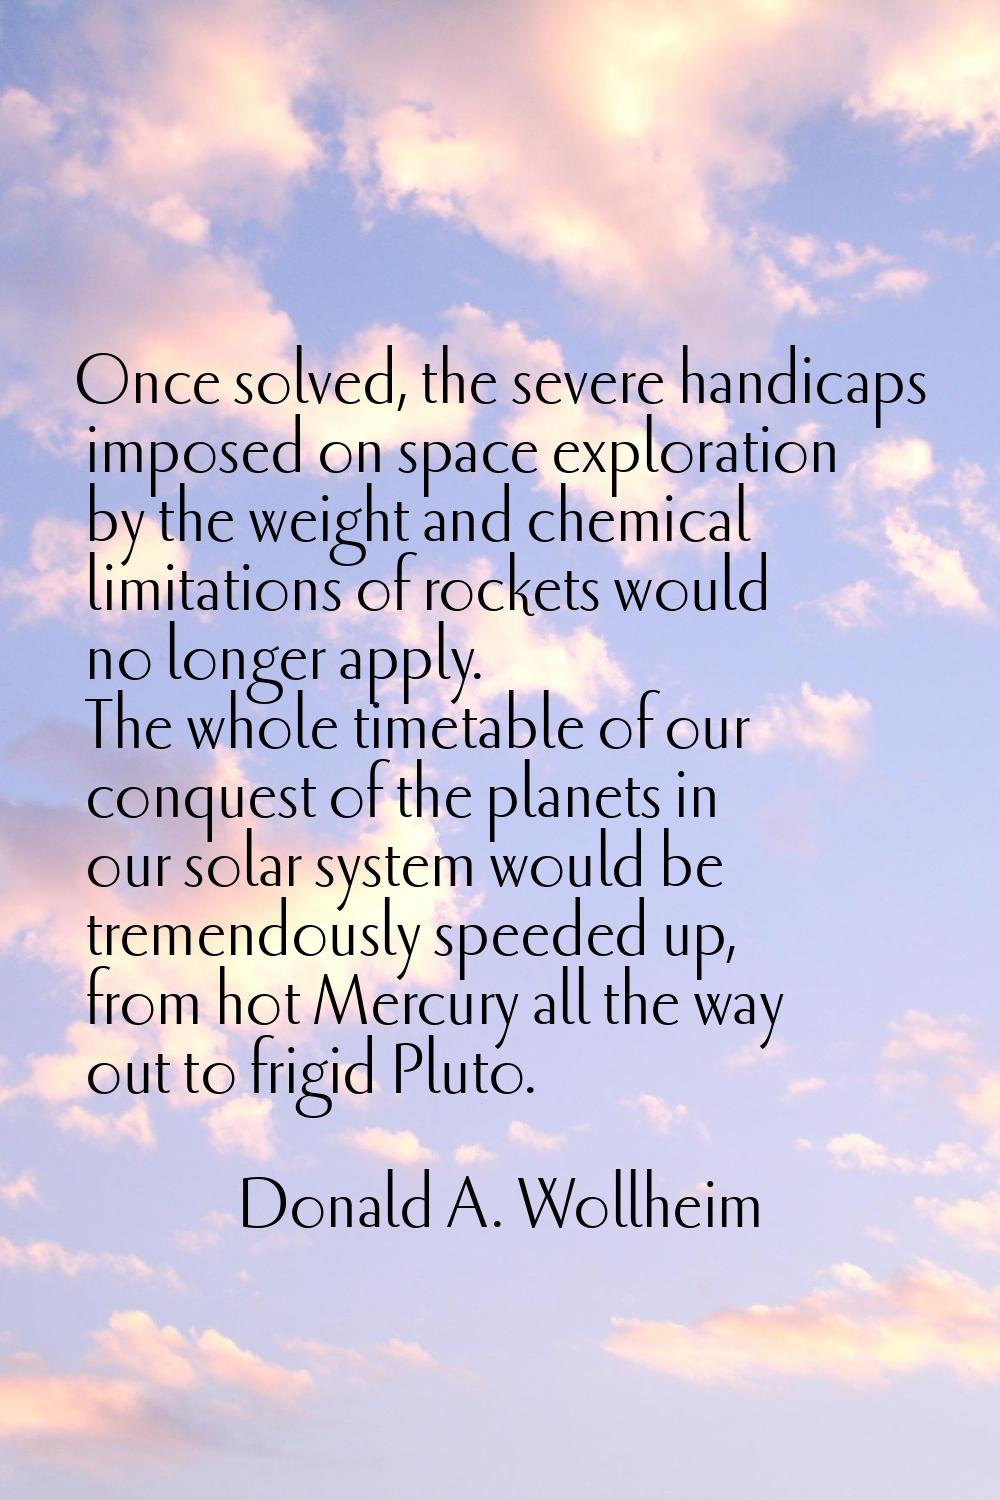 Once solved, the severe handicaps imposed on space exploration by the weight and chemical limitatio